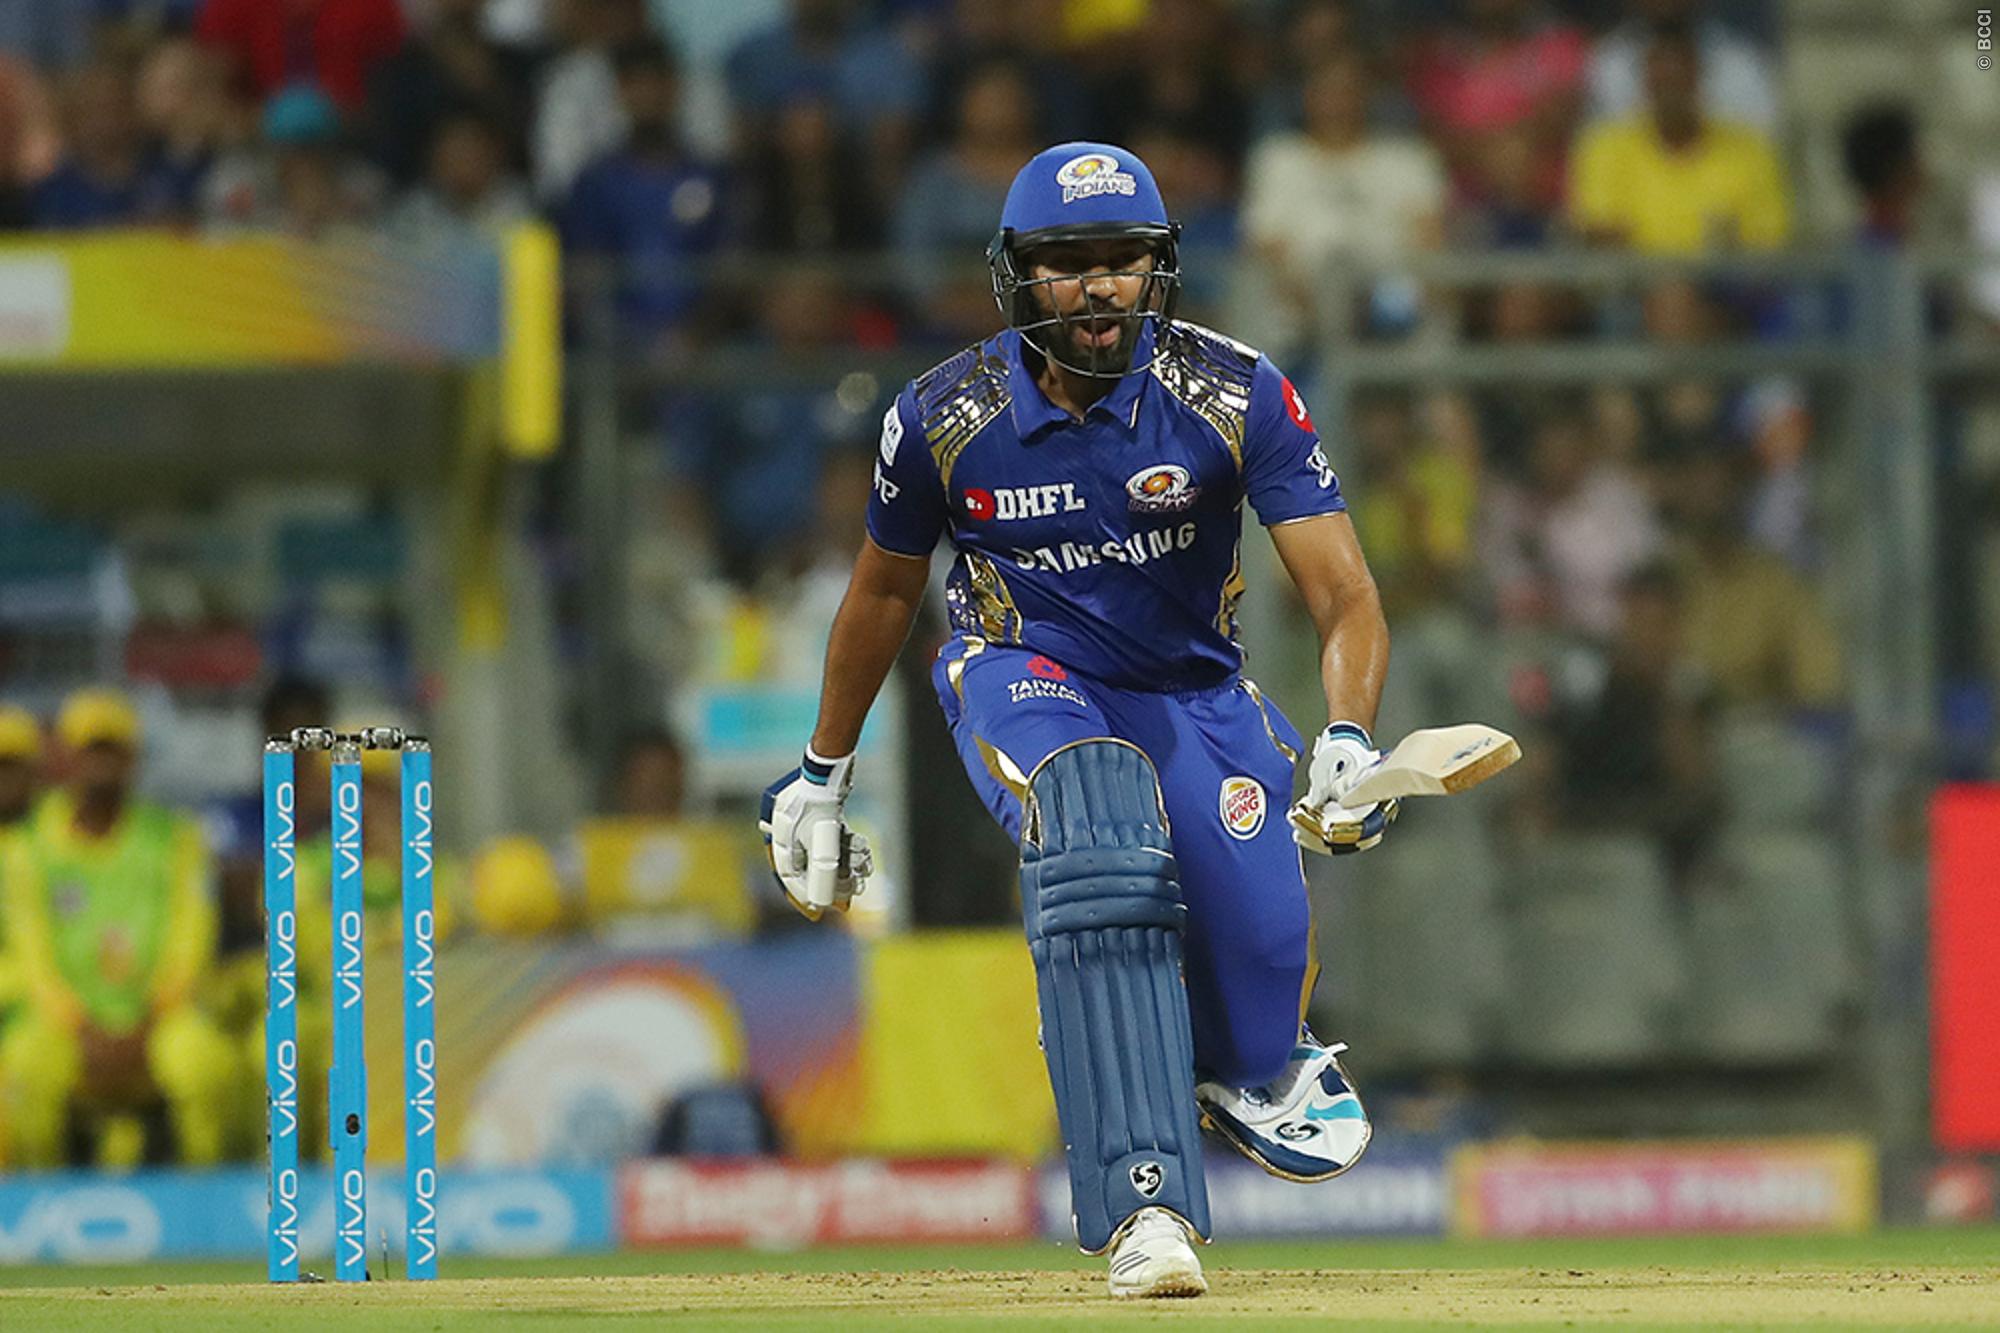 Rohit was not fit for selection, him playing IPL games can’t be benchmark, says Jatin Paranjape